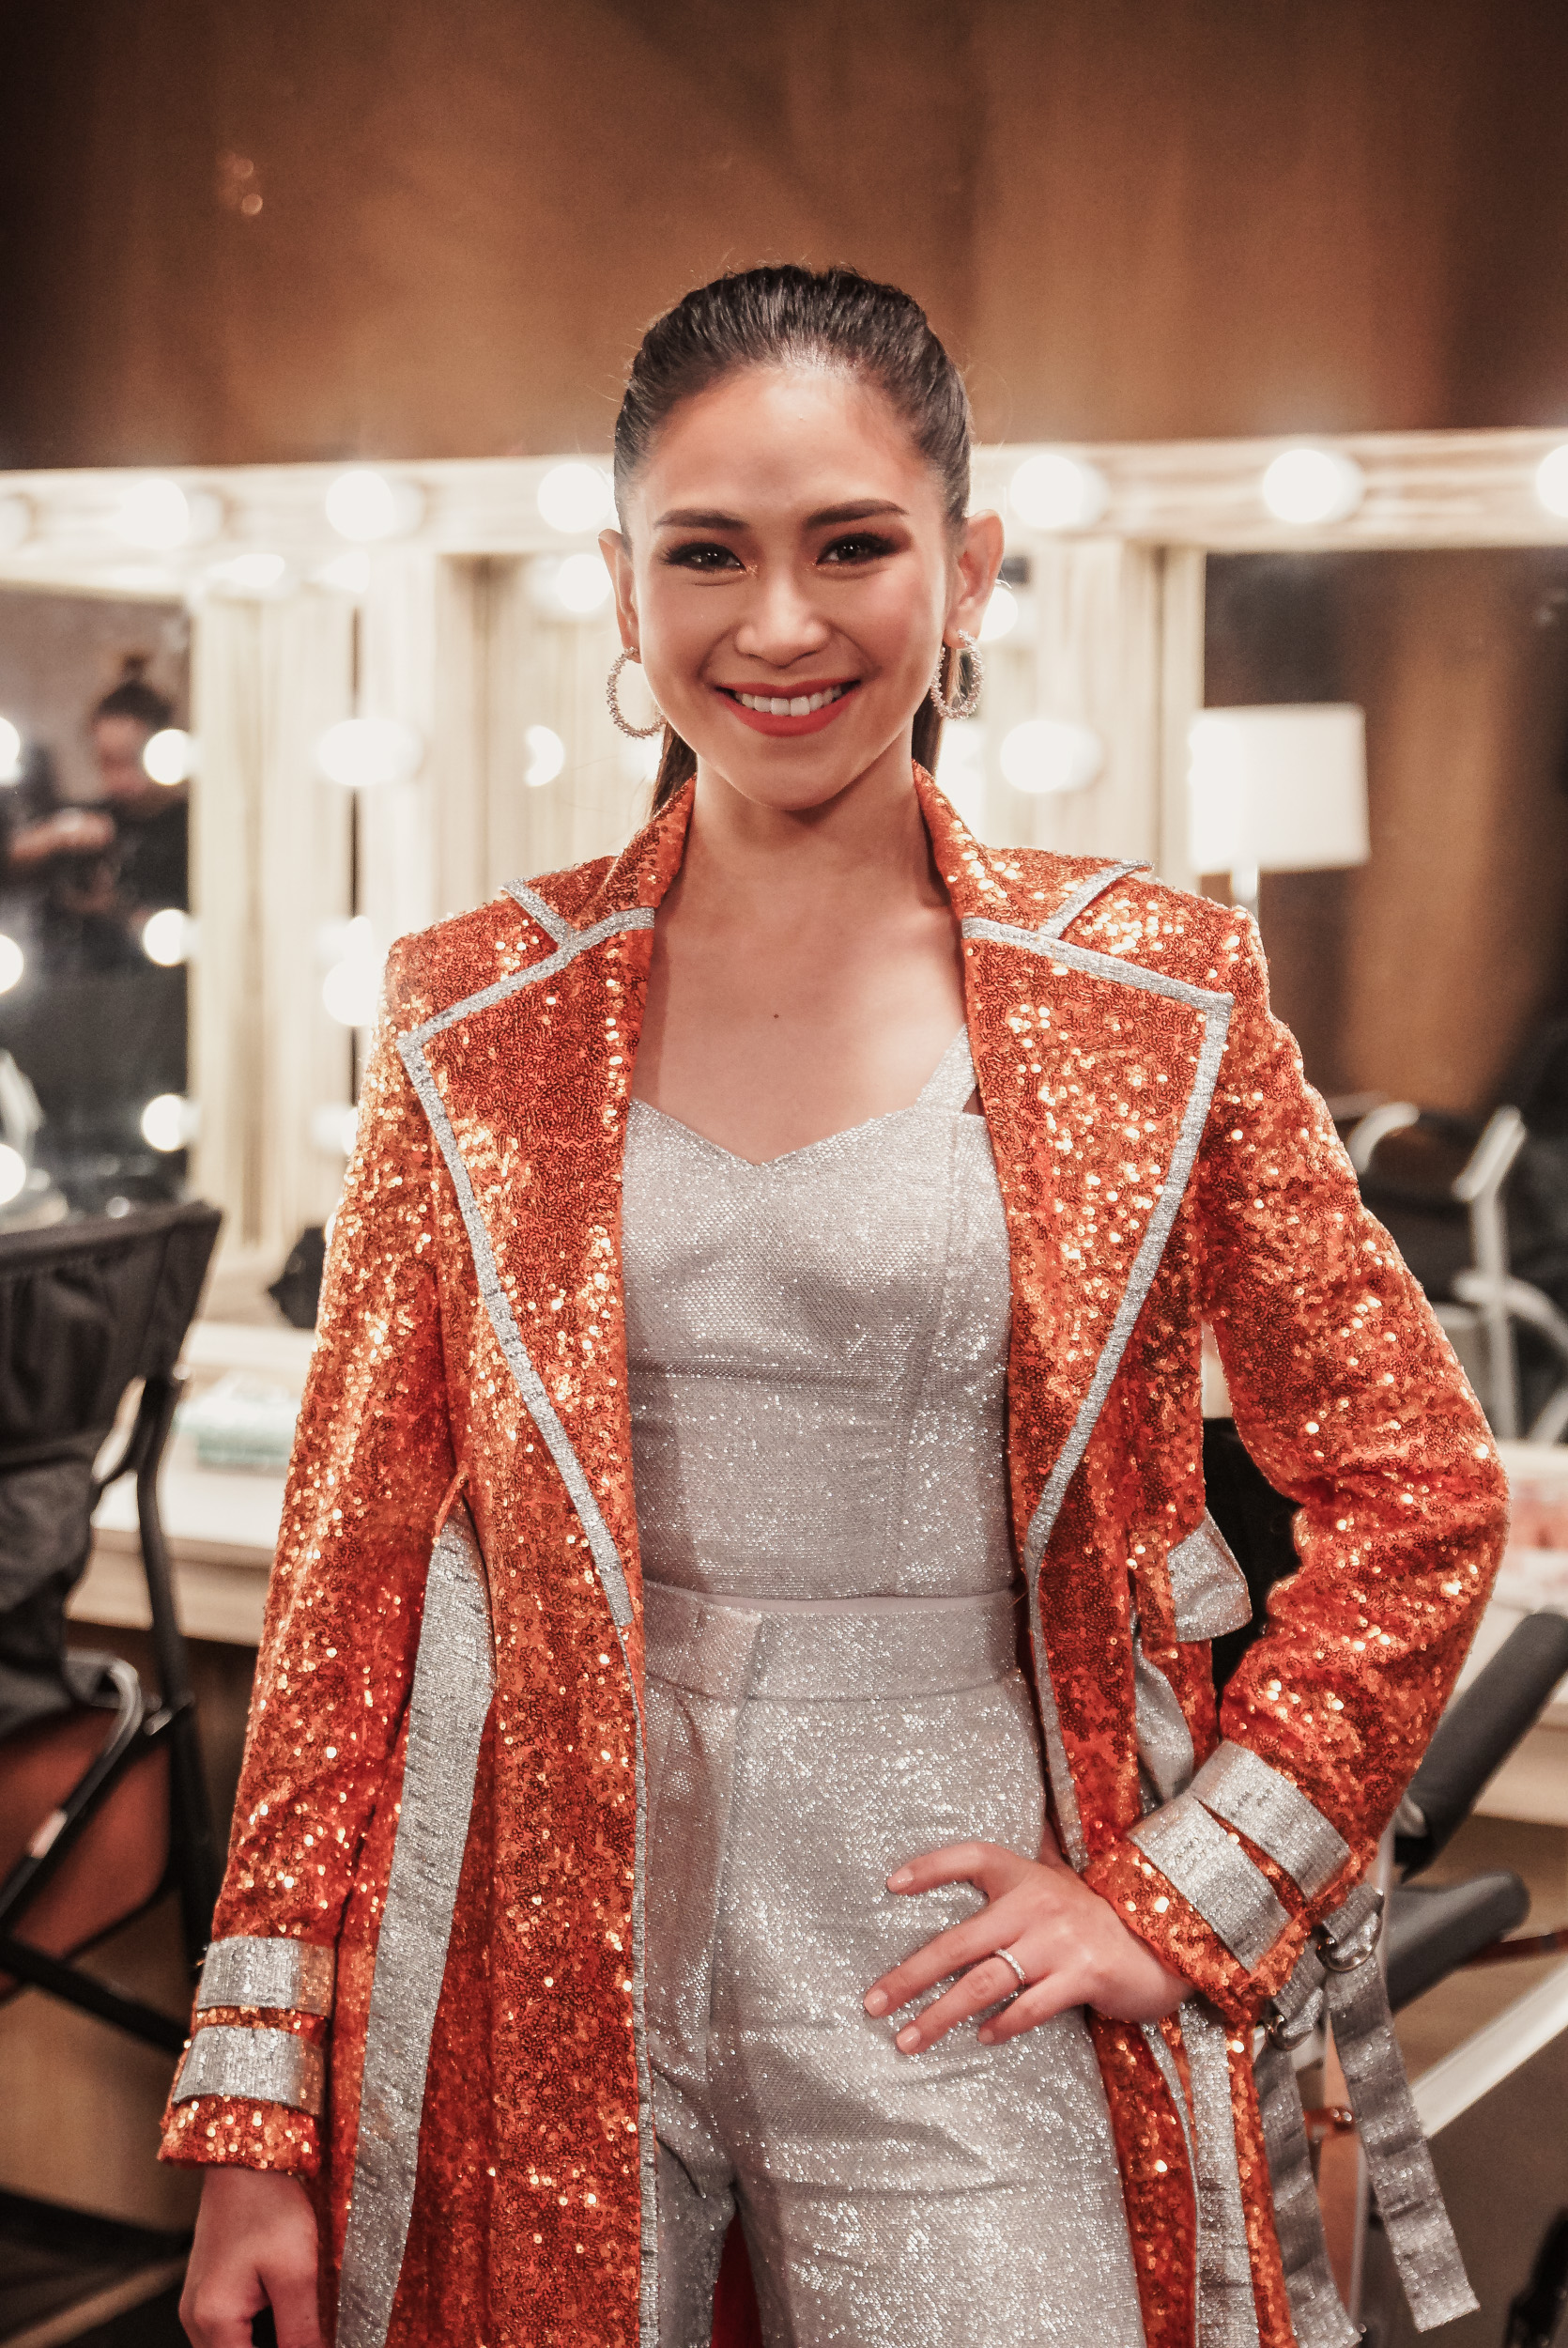 Popstar Royalty Sarah Geronimo Shares Positivity and Happiness in Challenging Times